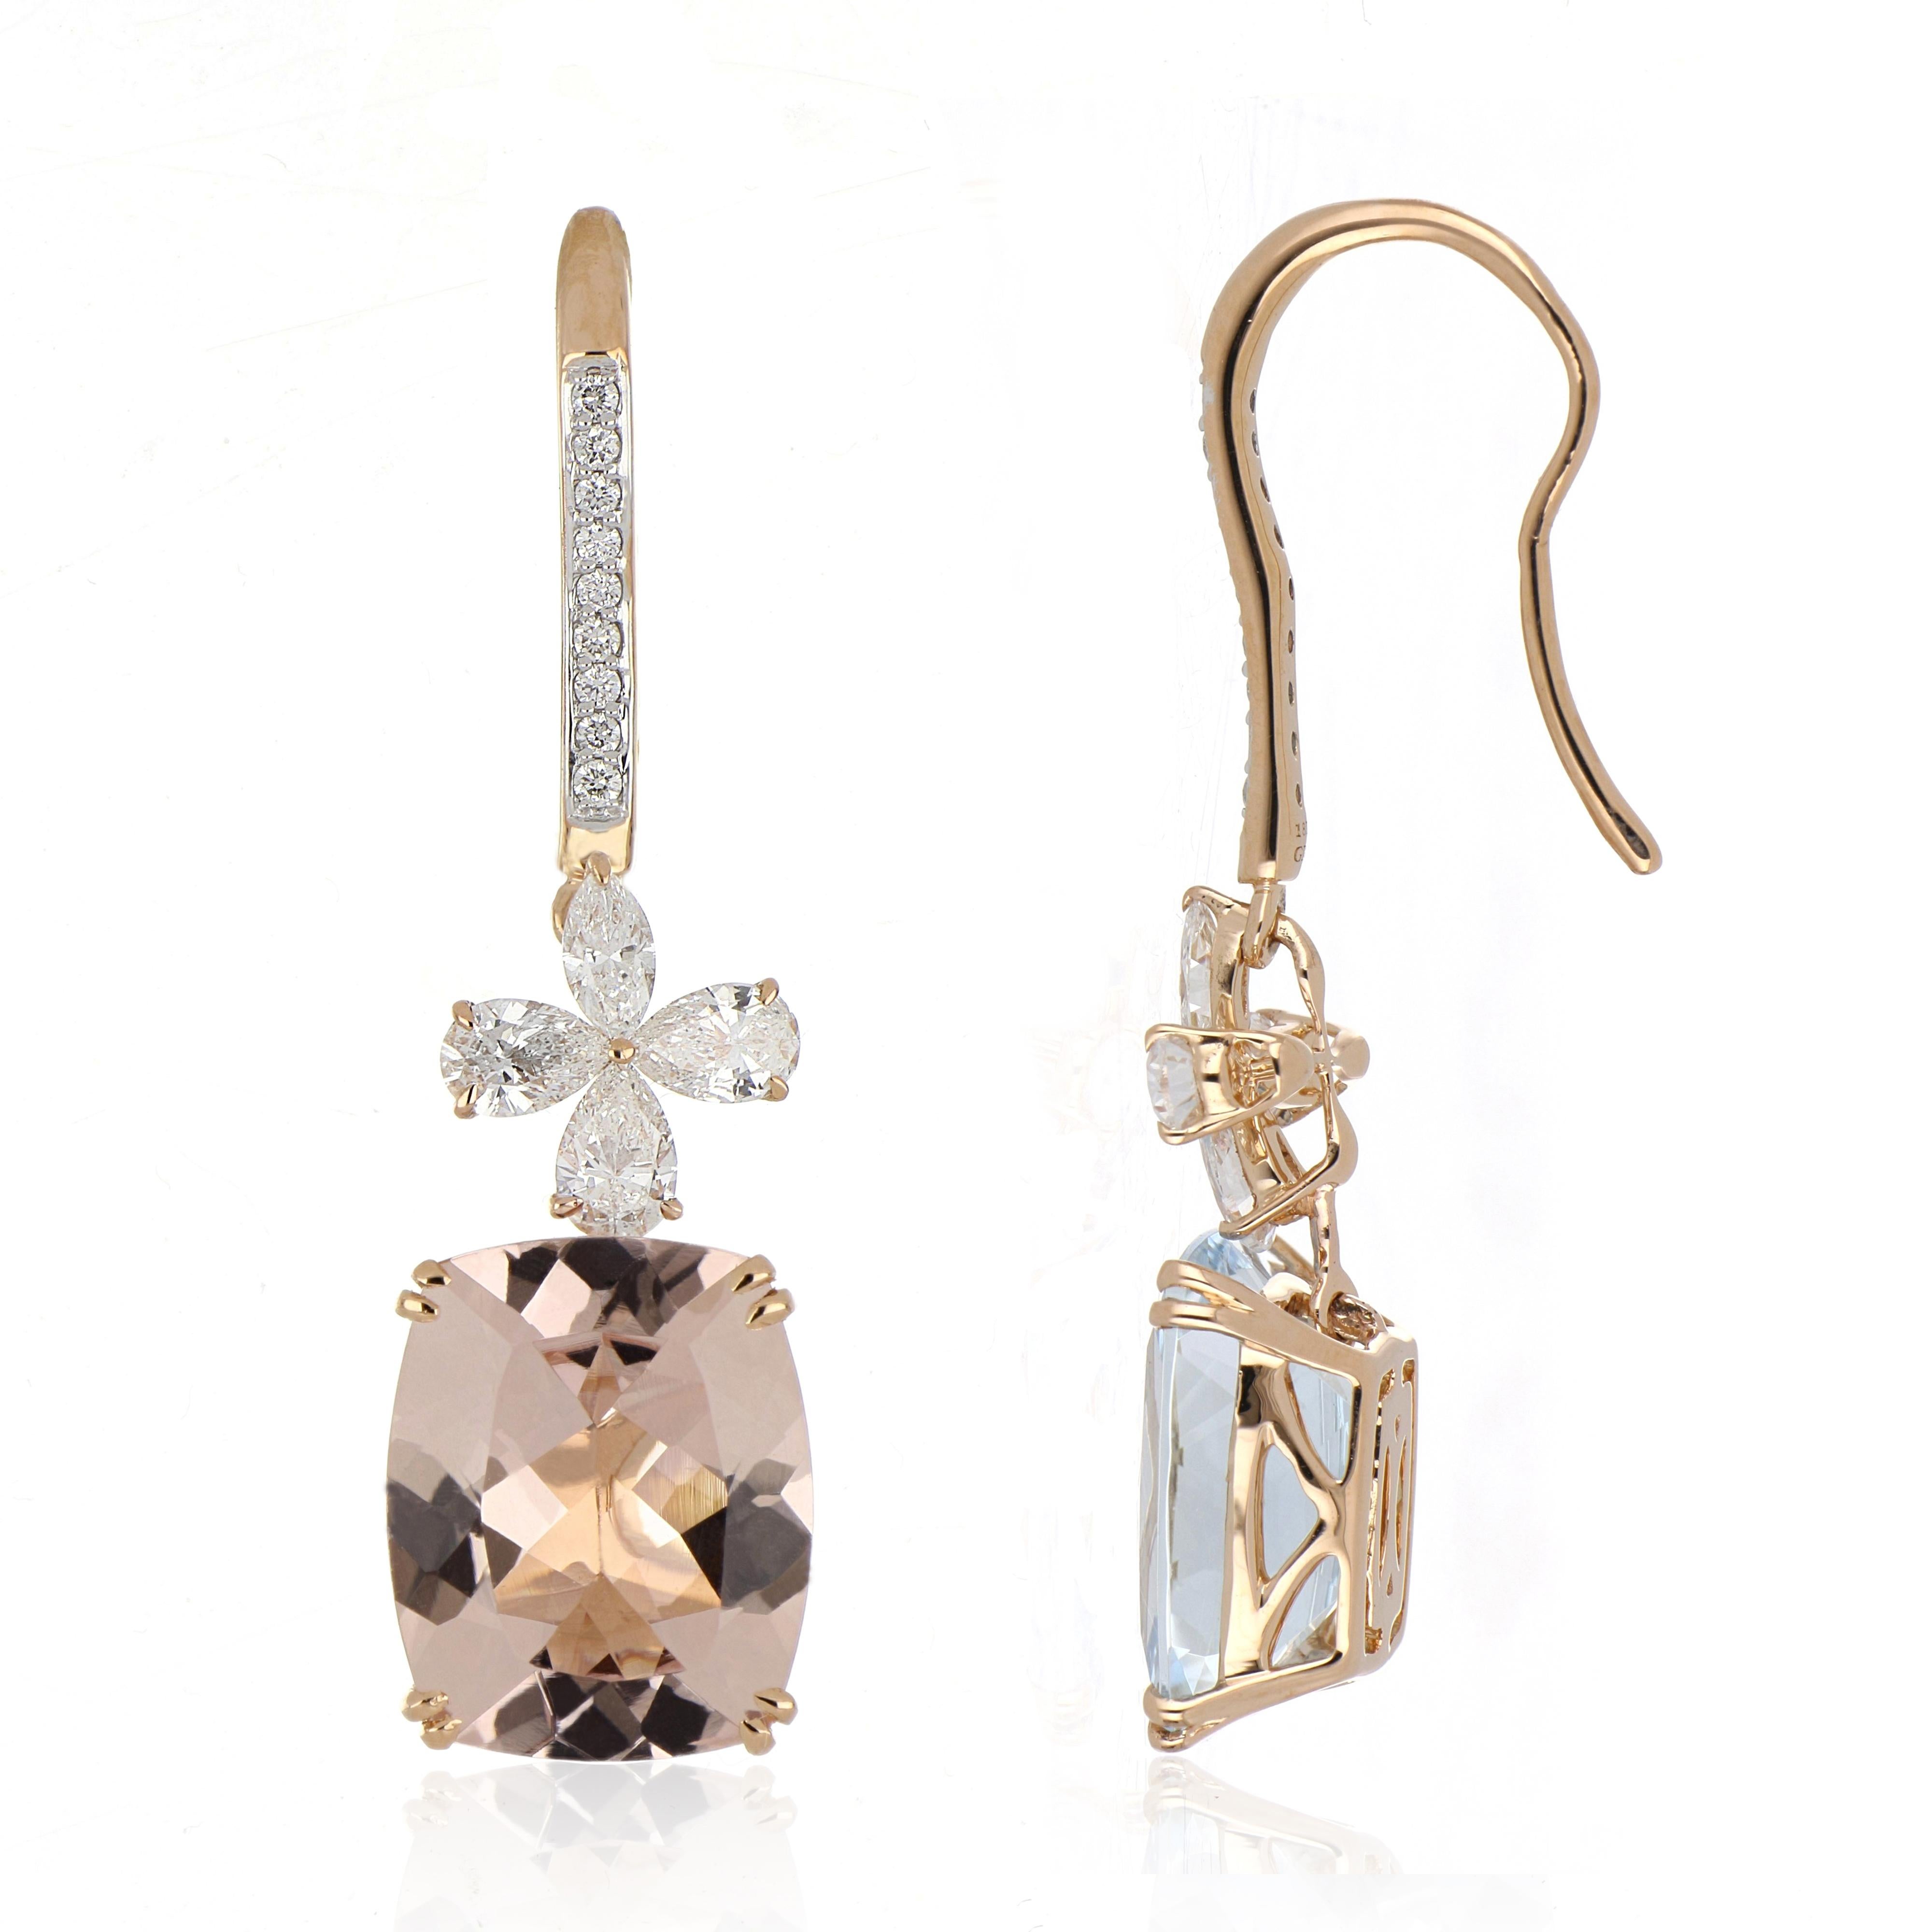 Elegant and Exquisitely detailed Dangling Gold Earrings, set with 2.82 Ct (total ) Aquamarine, 3.13 Cts (total)  Morganite, accented with Diamonds, weighing approx. 0.73 Cts. total carat weight.  Beautifully Hand crafted in 18 Karat Rose